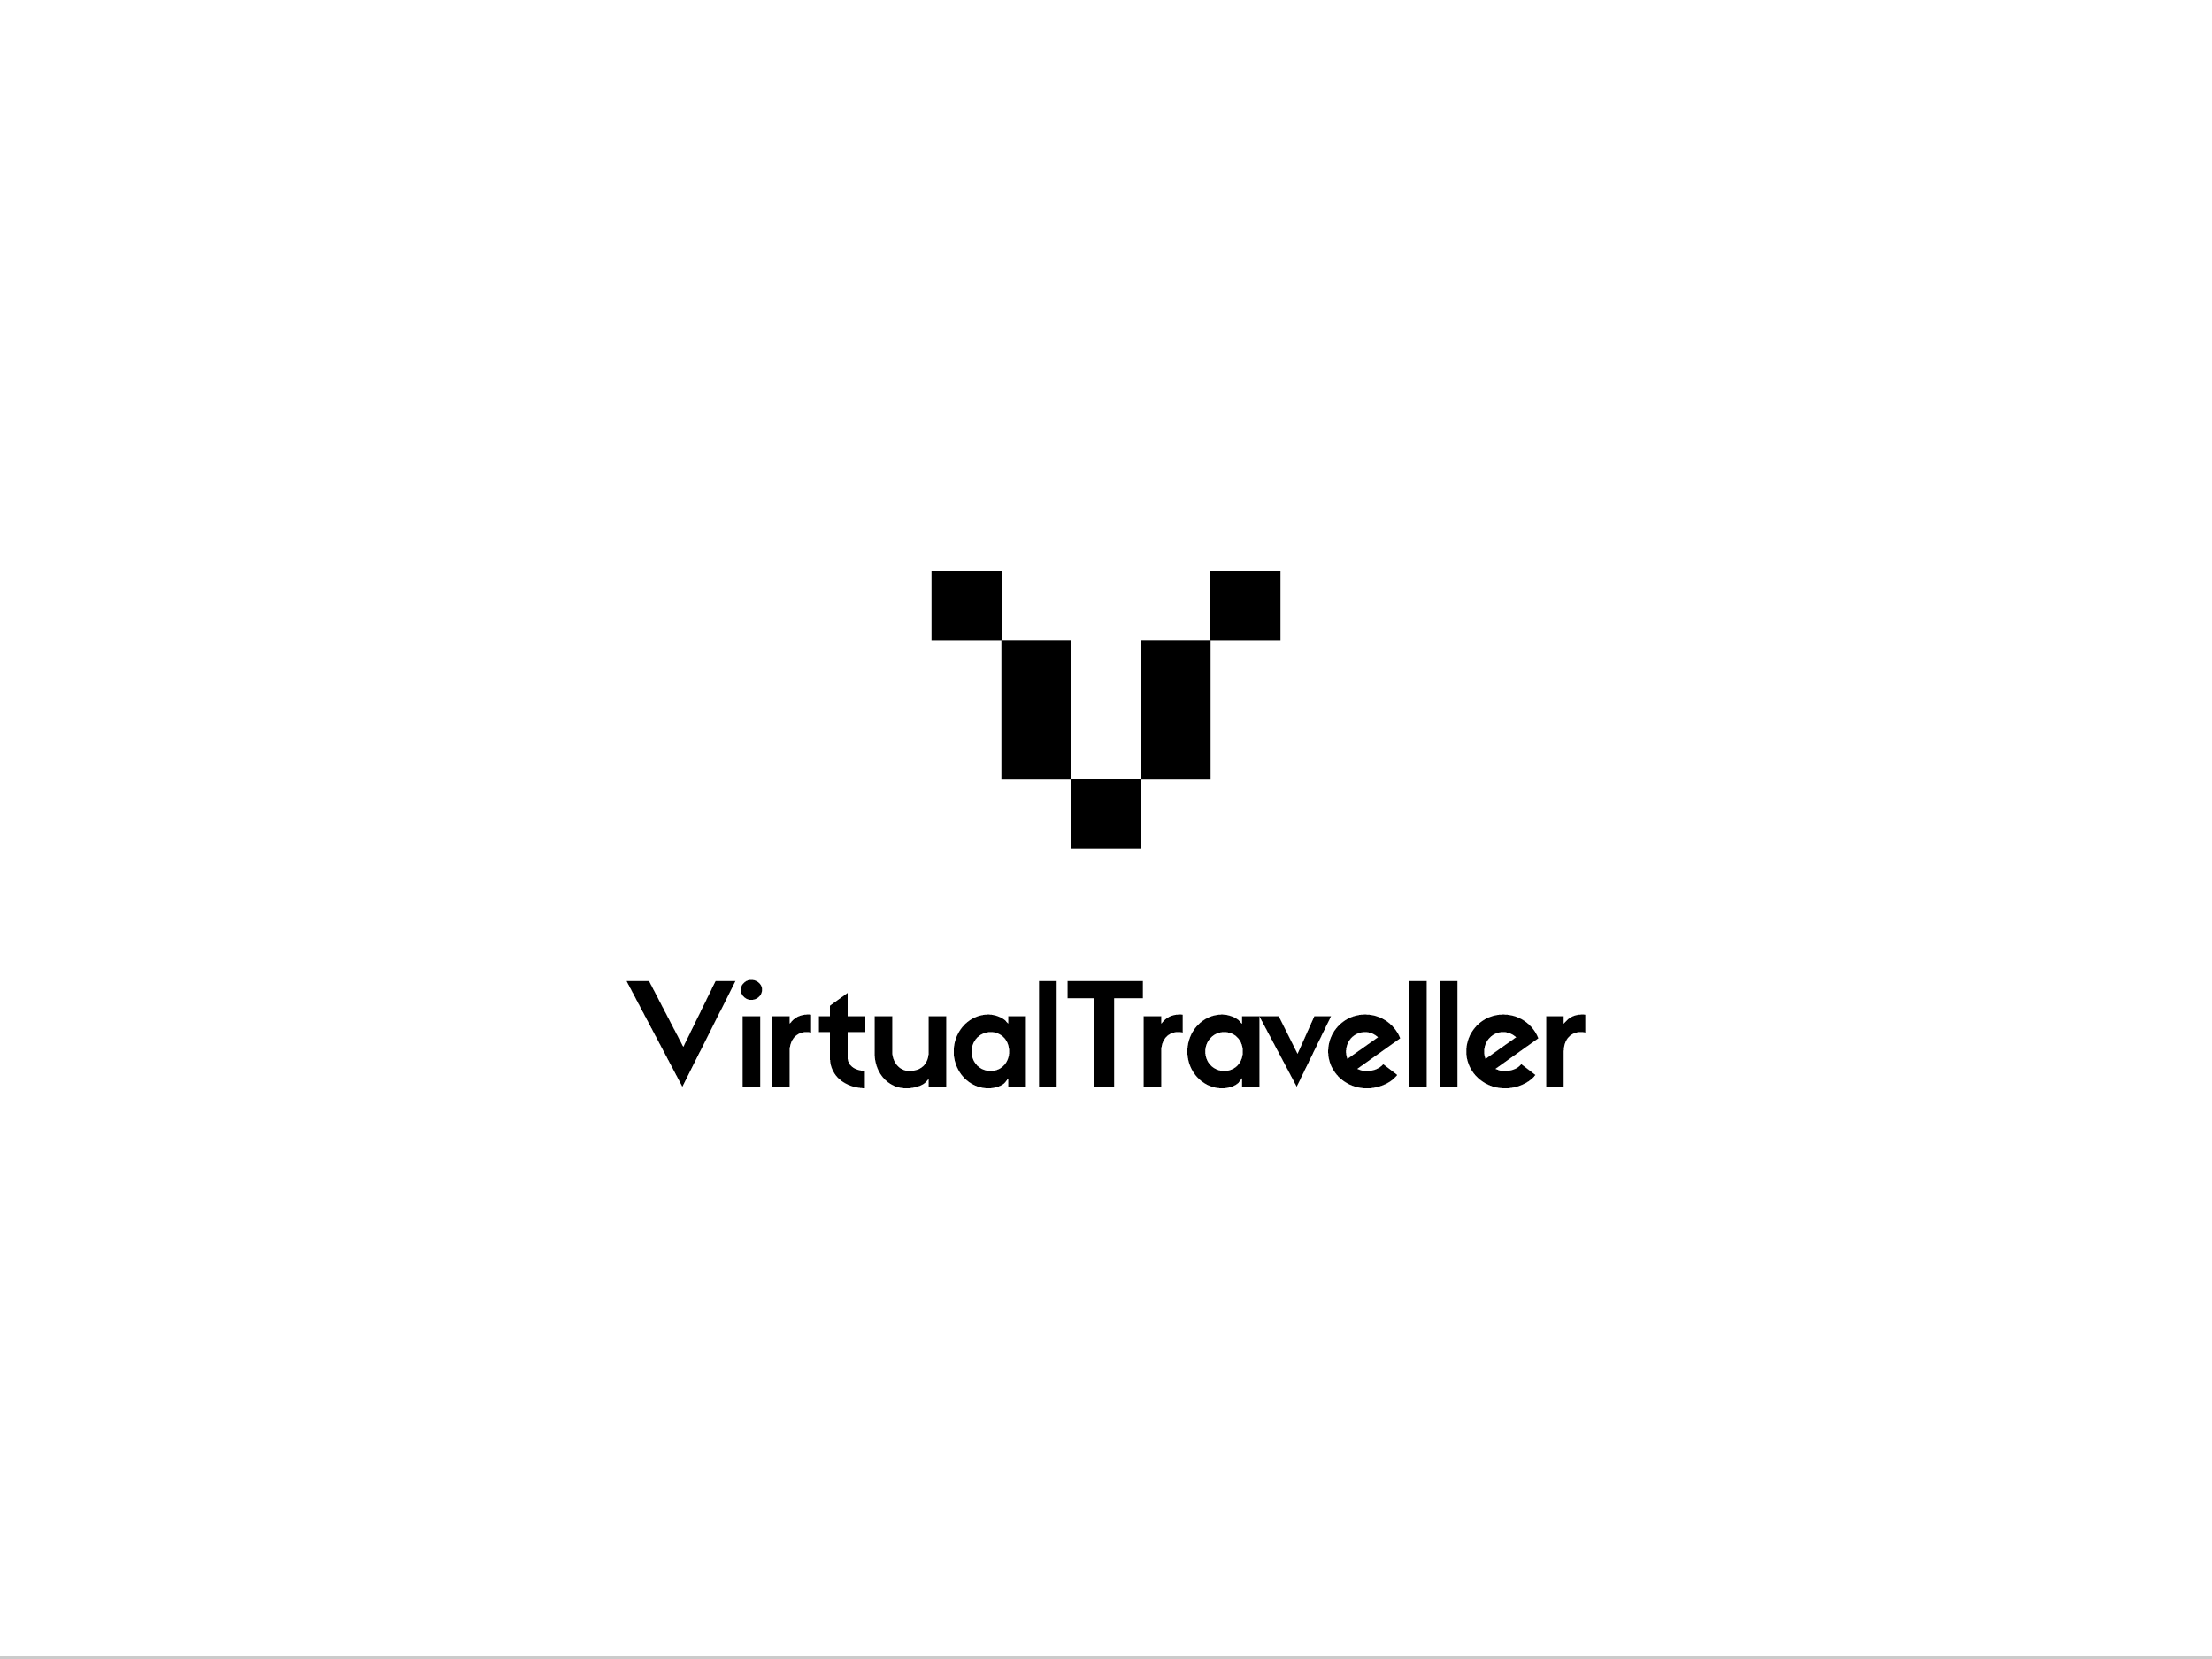  Virtual Traveller, VR company and service 